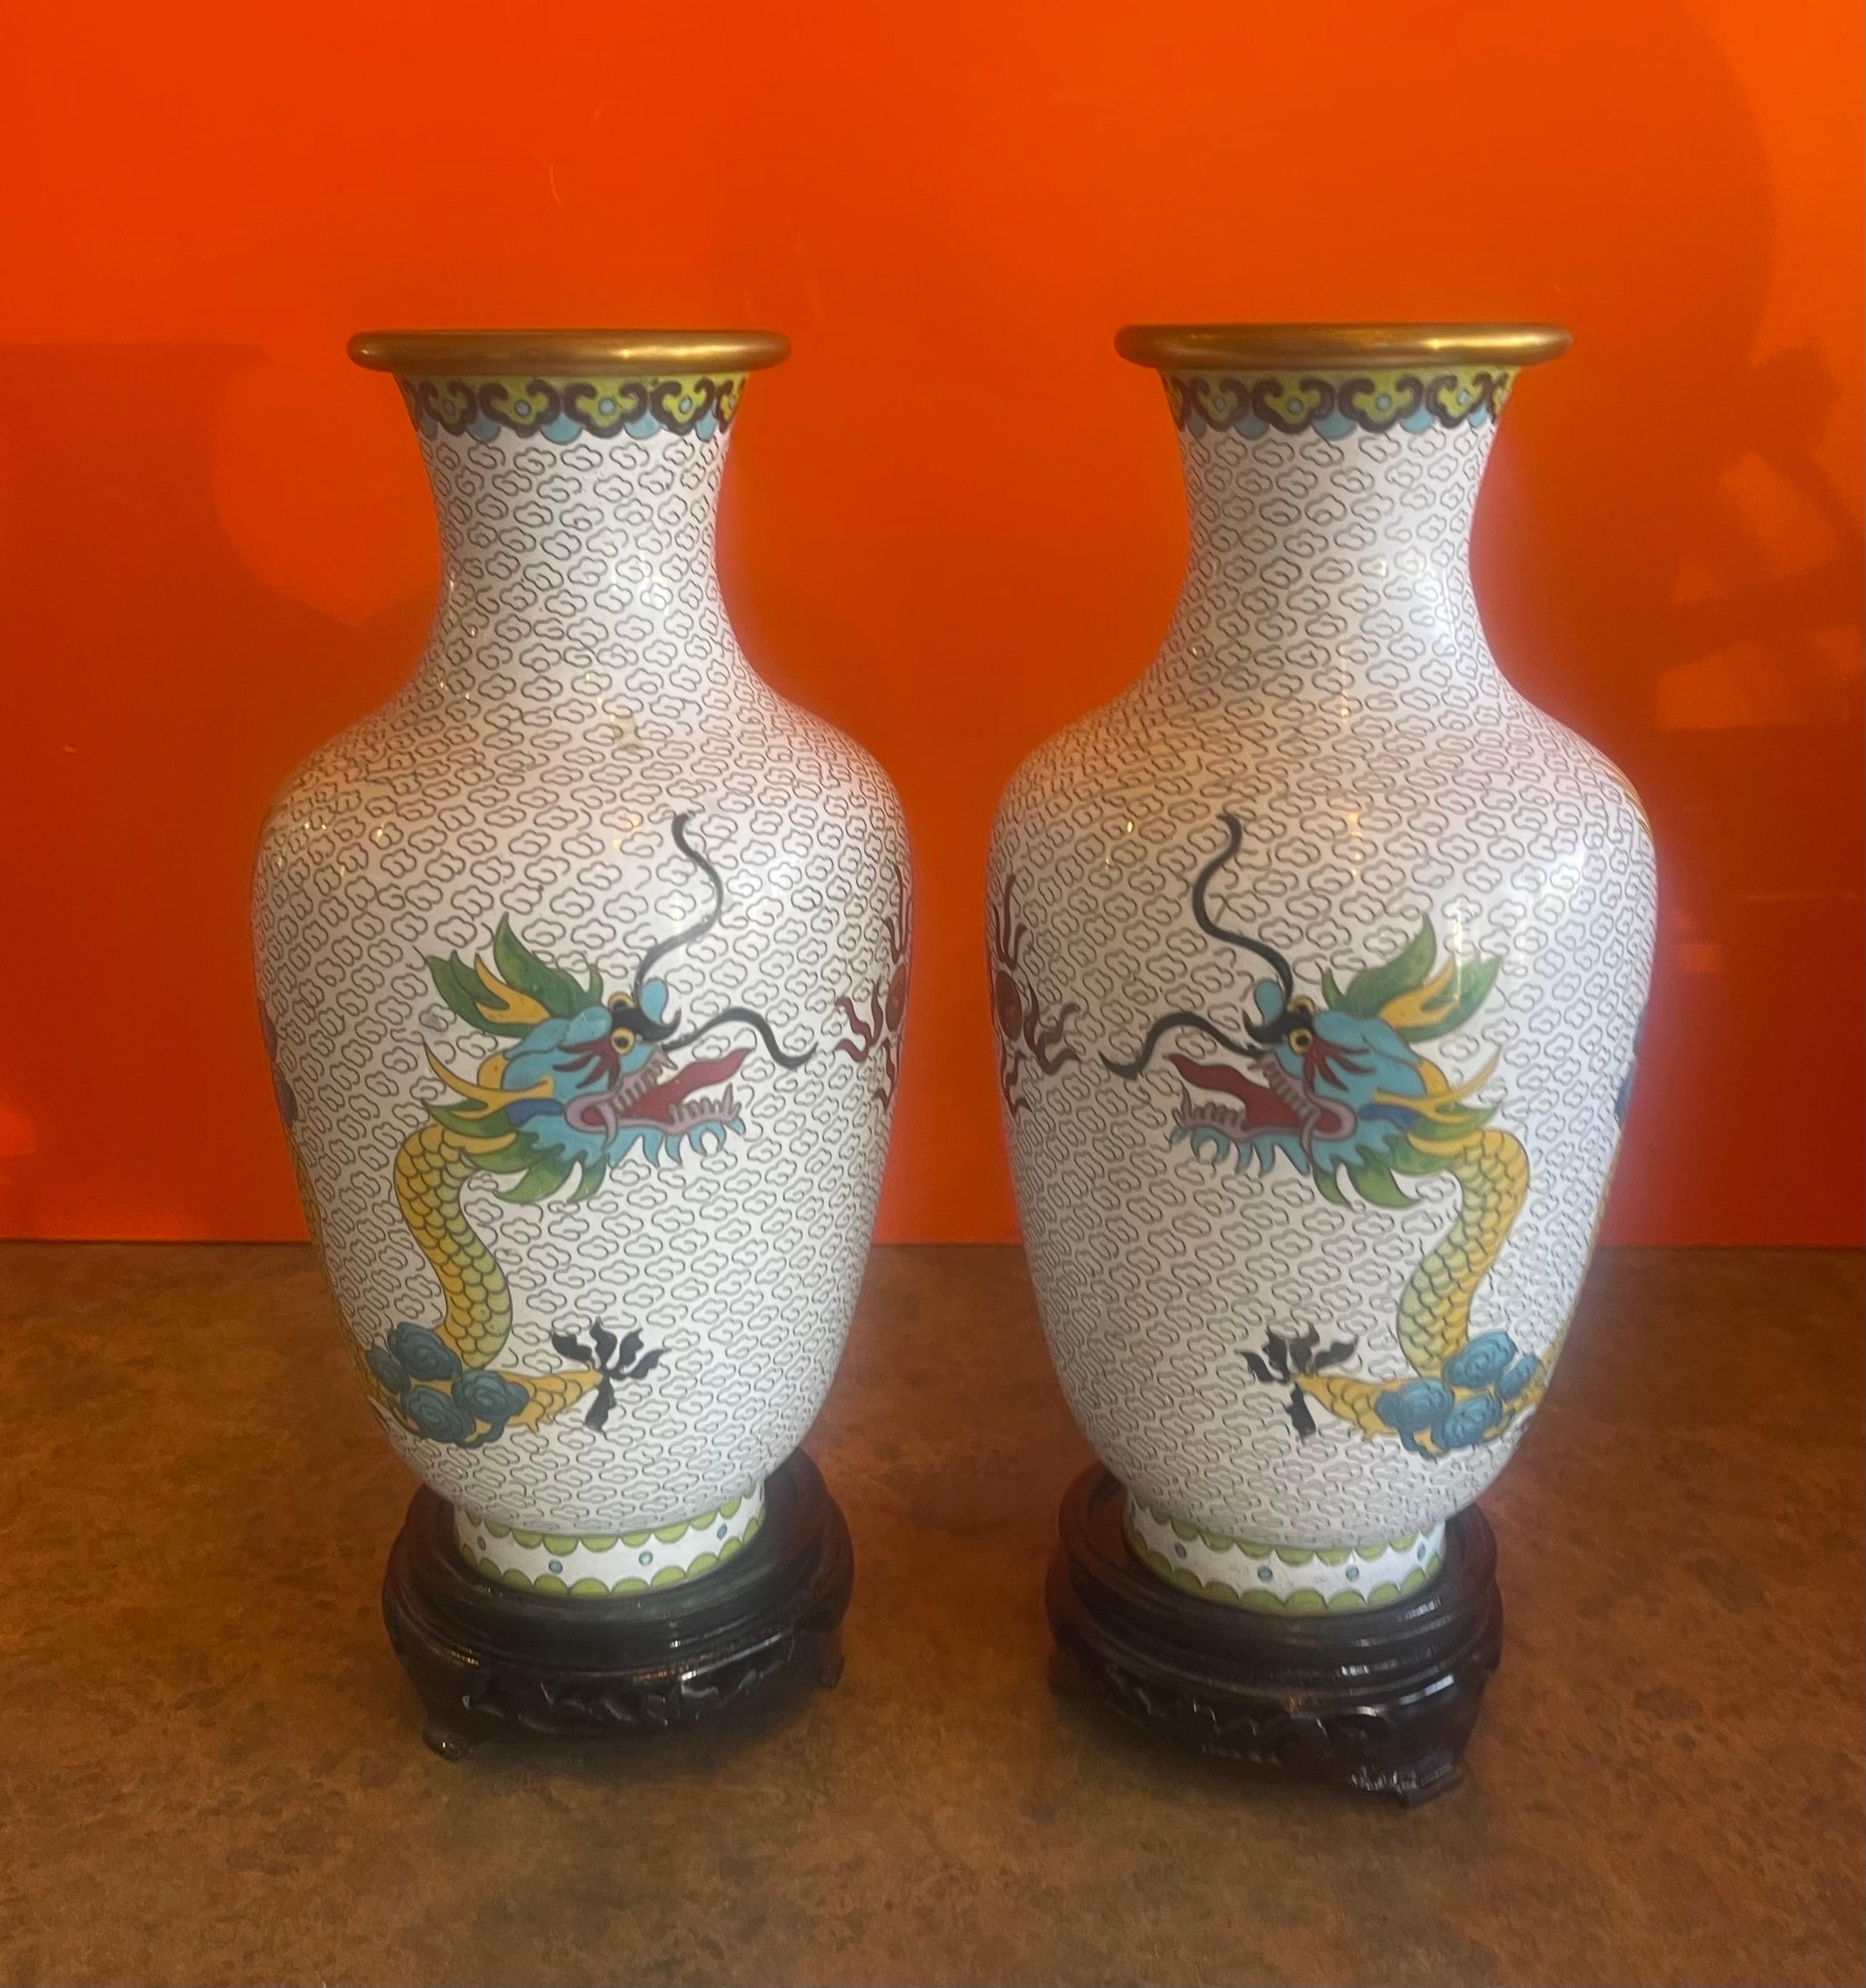 Mirrored Pair of Chinese Cloisonne Vases with Dragon Motif In Good Condition For Sale In San Diego, CA